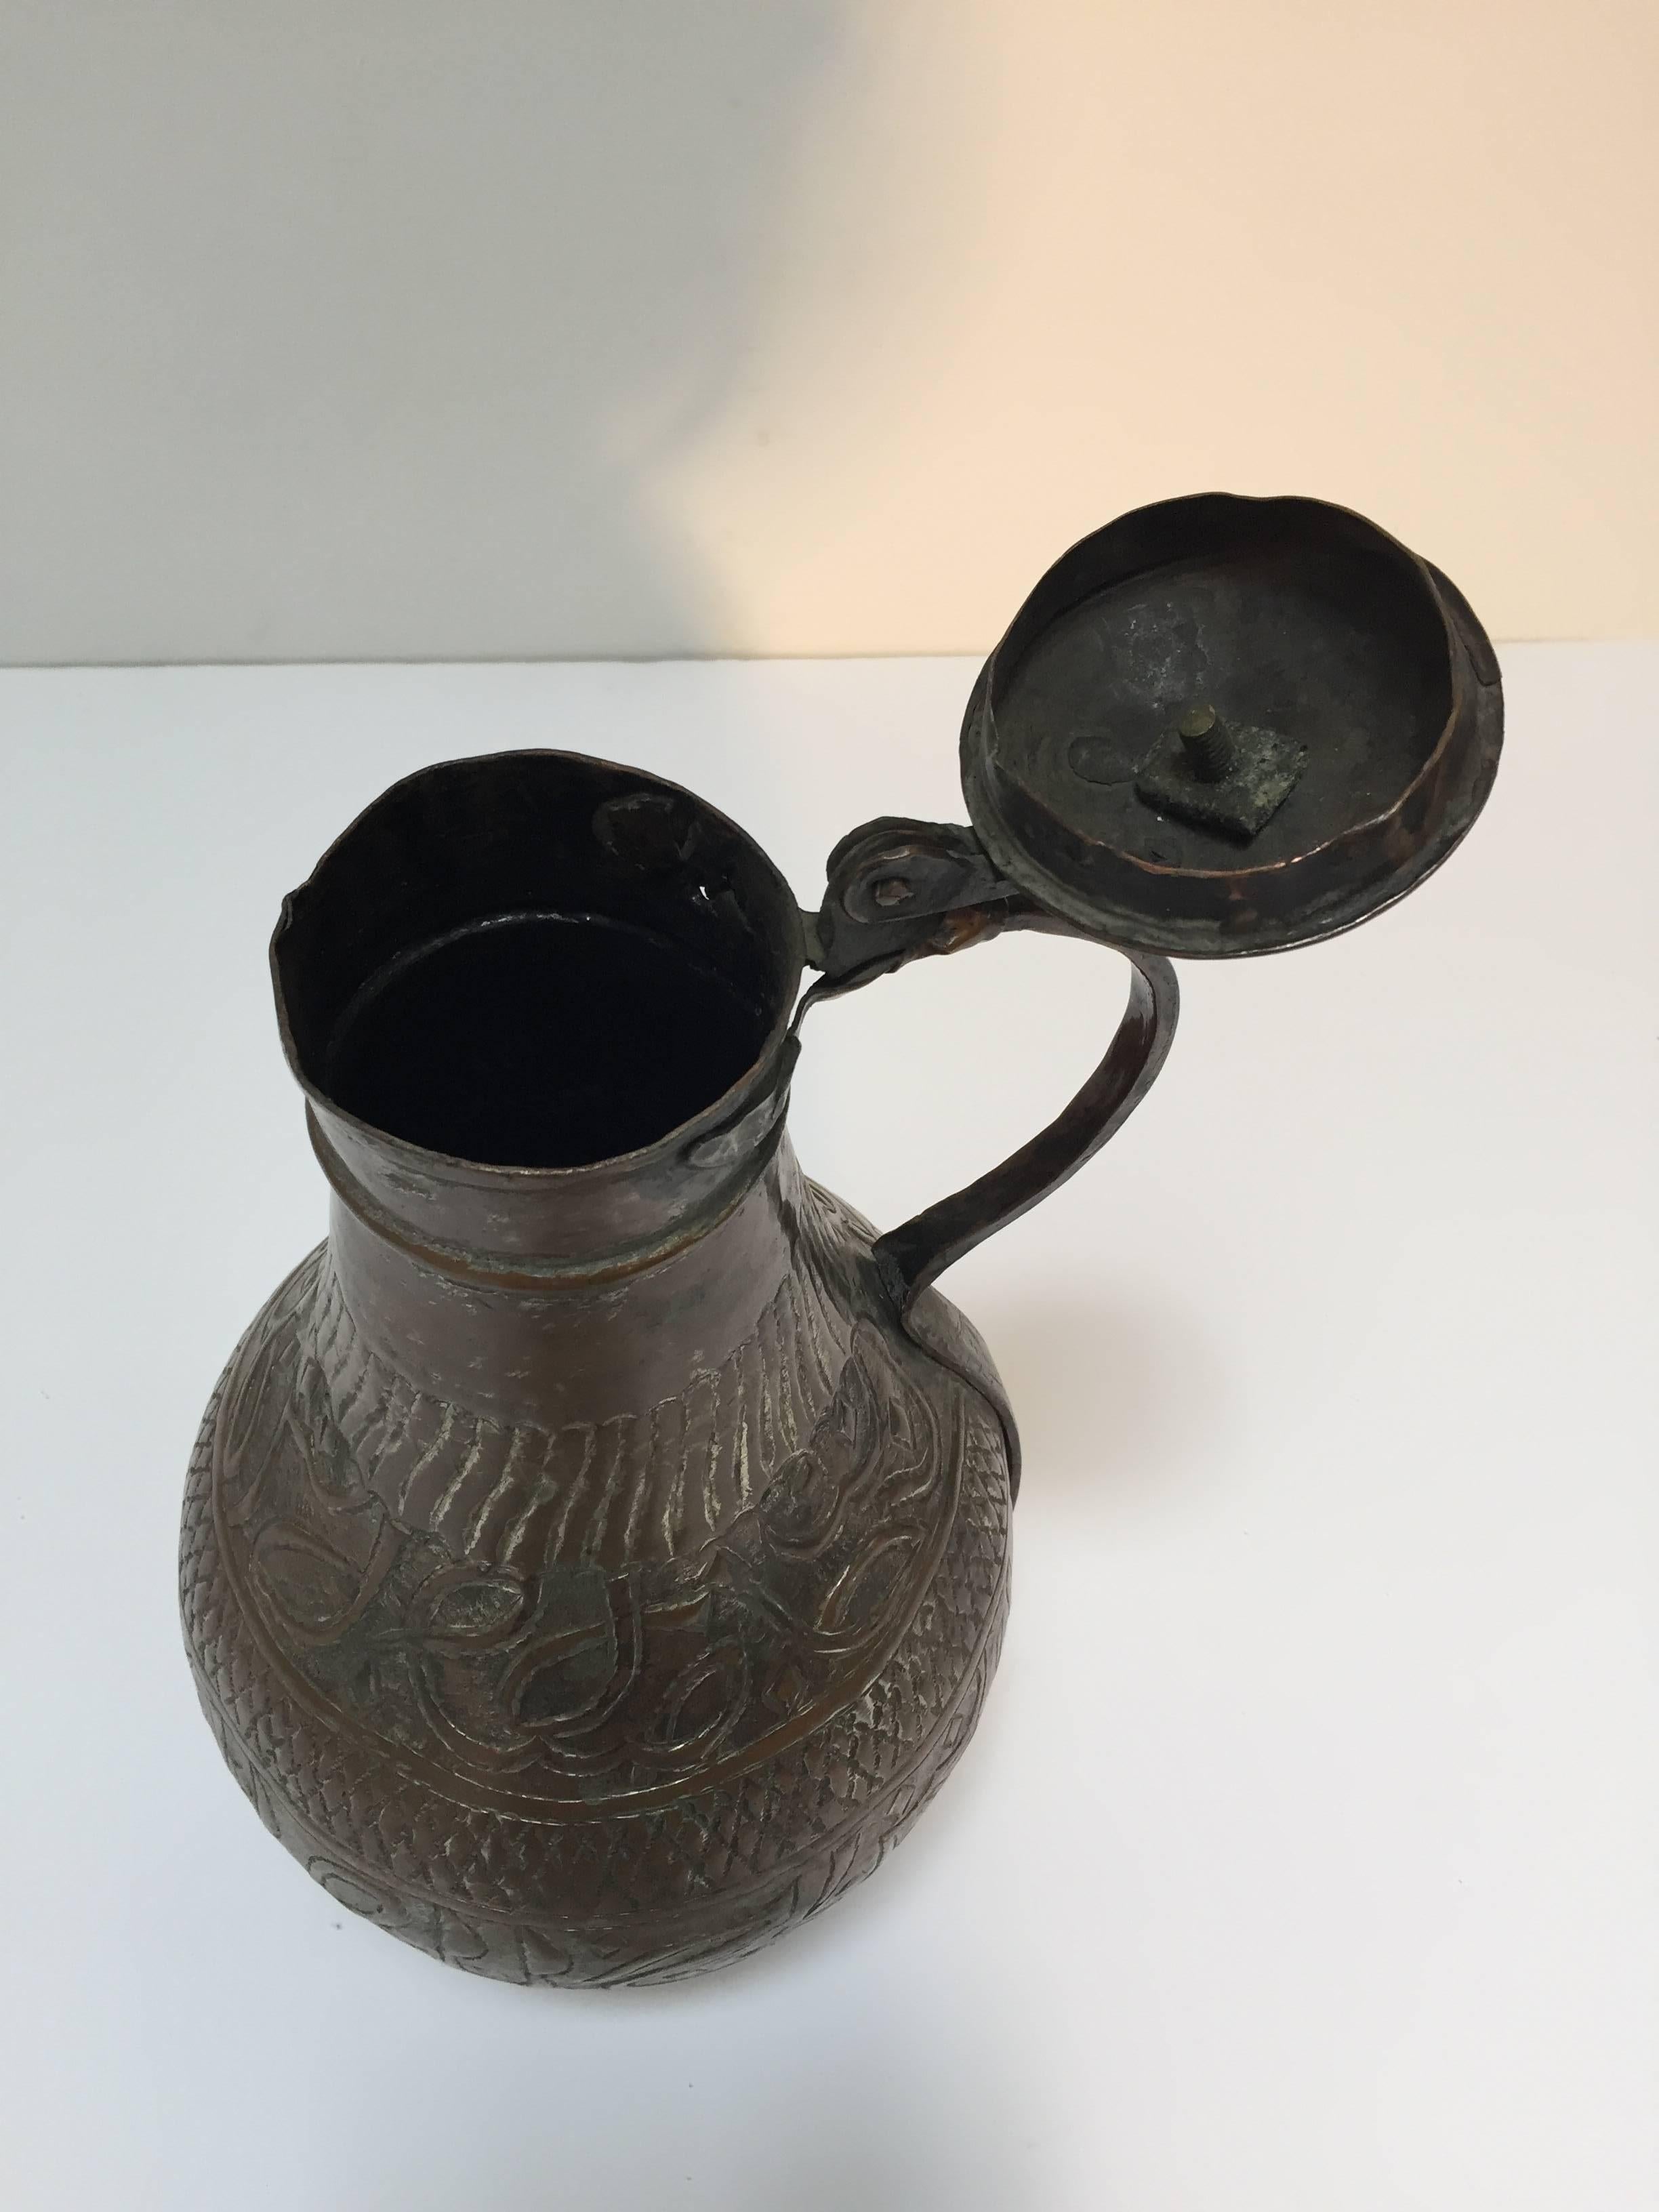 19th Century Middle Eastern Tinned Copper Ewer In Good Condition For Sale In North Hollywood, CA